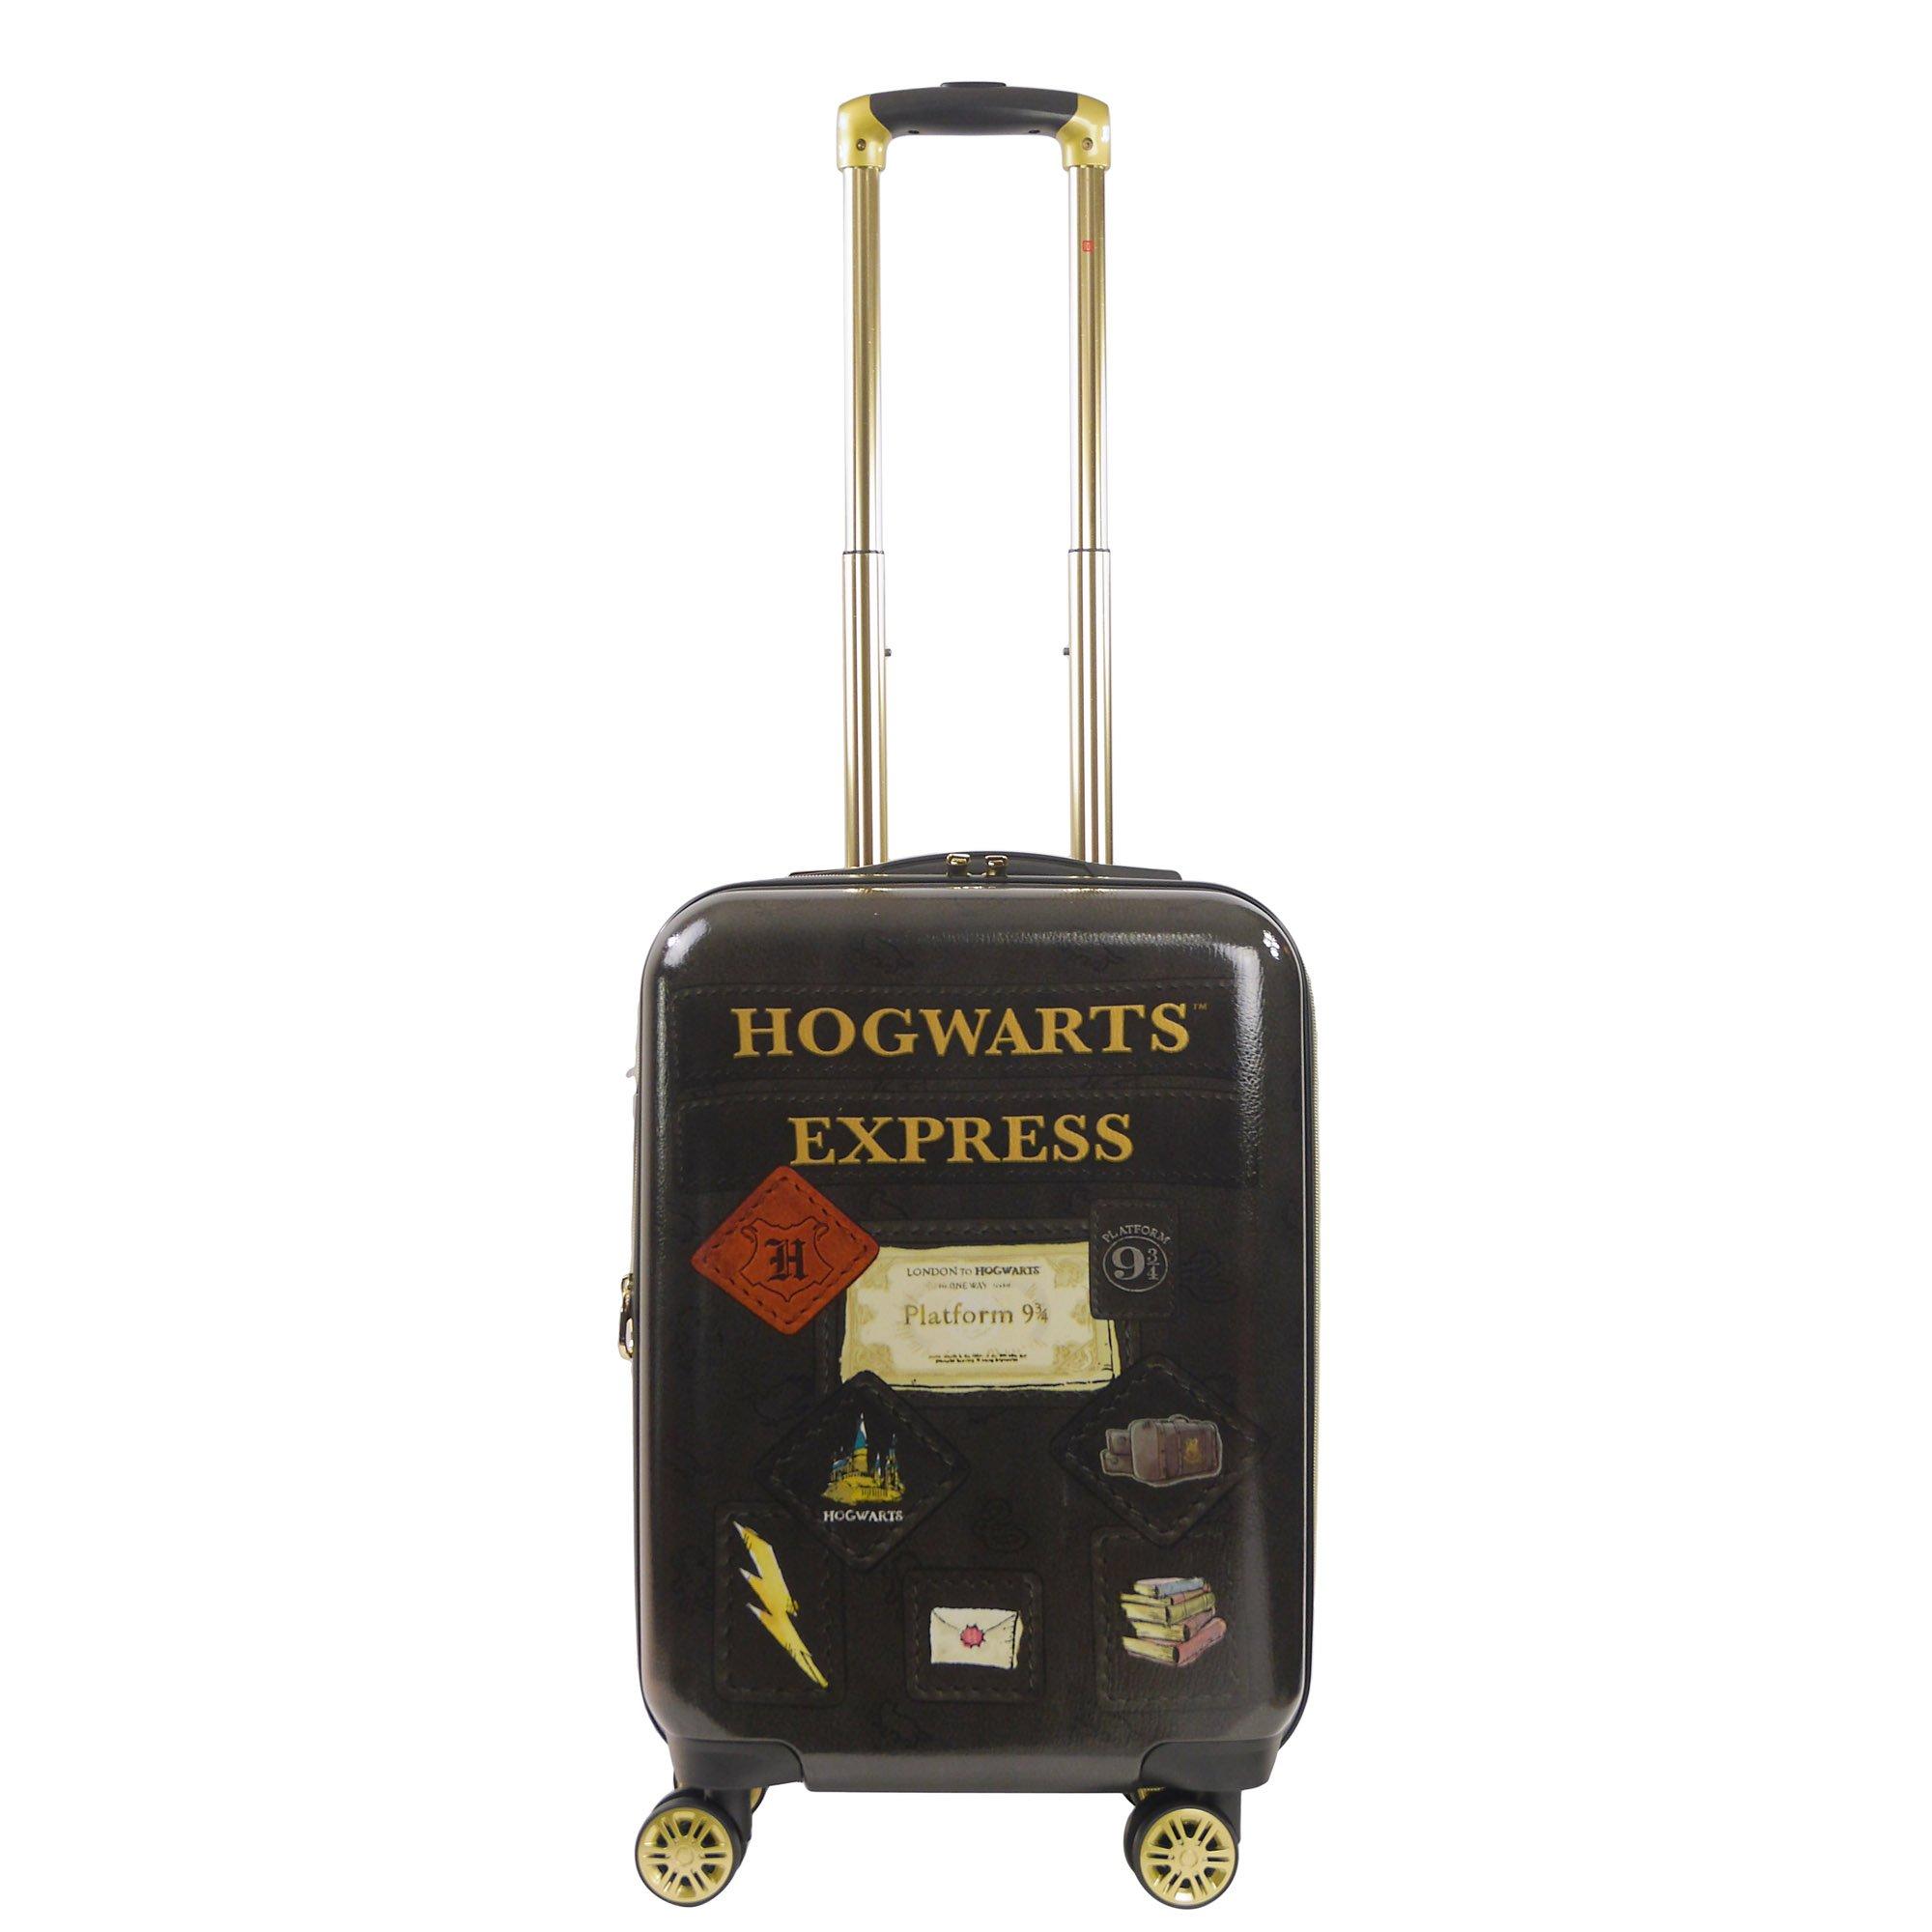 FUL Warner Brothers Harry Potter Hogwart Express -in Hard-Sided Carry-On Luggage